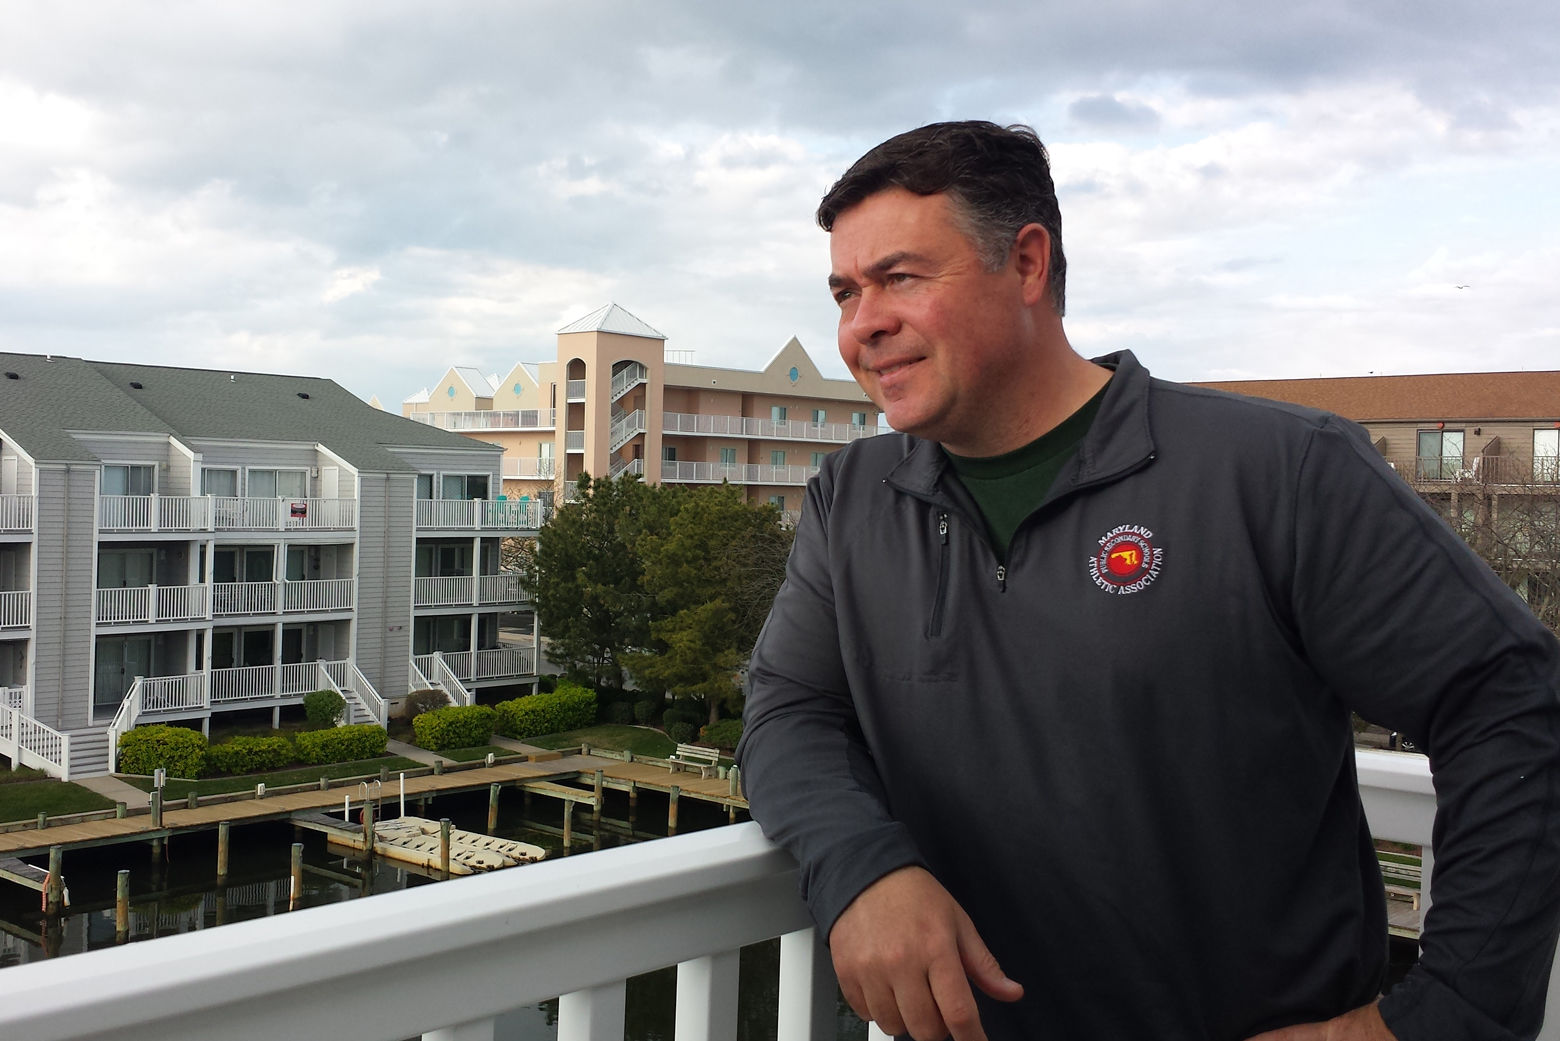 Mike McEwen, an athletic director for a public school in Baltimore County, bought a place in Ocean City after years of renting. His advice to fellow buyers: "Definitely shop around. See as many places as you can possibly see. Weigh your options carefully and go for it." (WTOP/Colleen Kelleher)